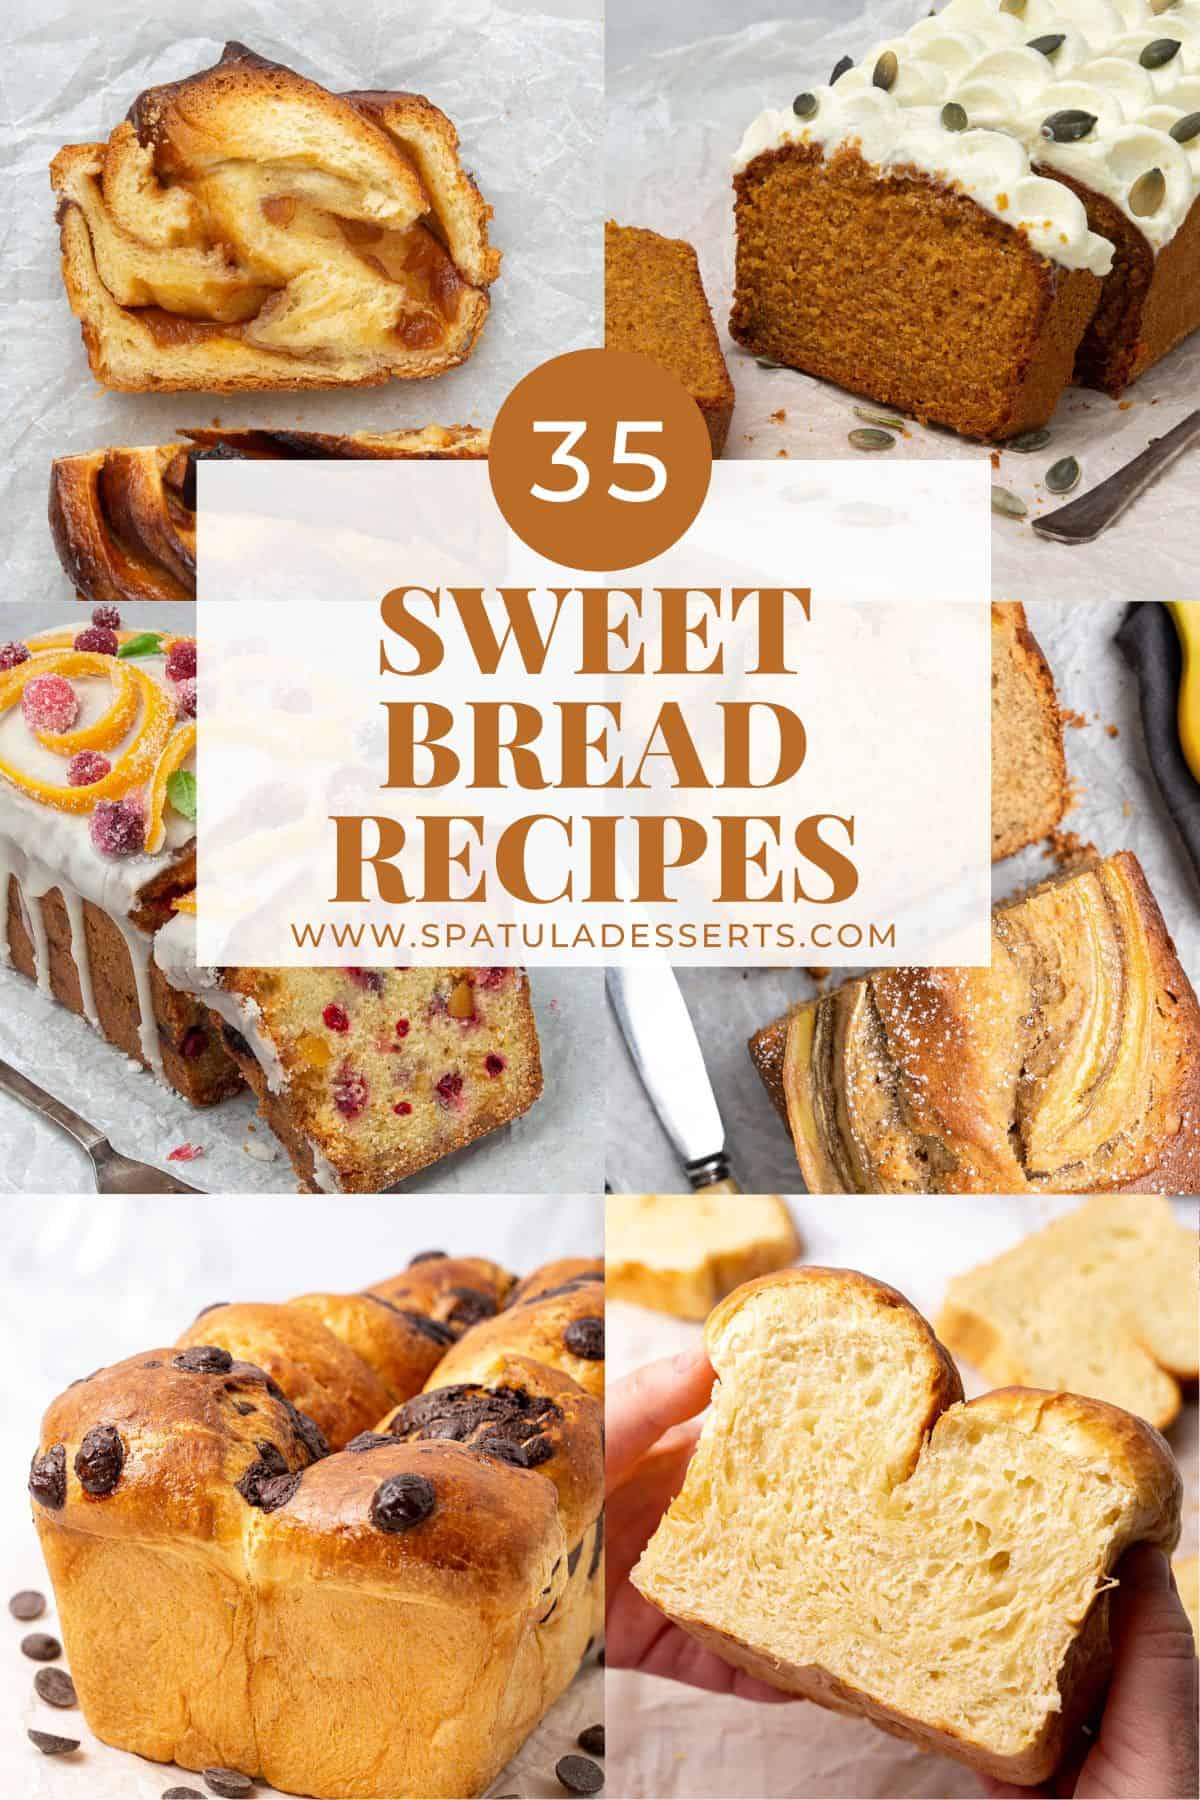 sweet bread recipes recipes collection.